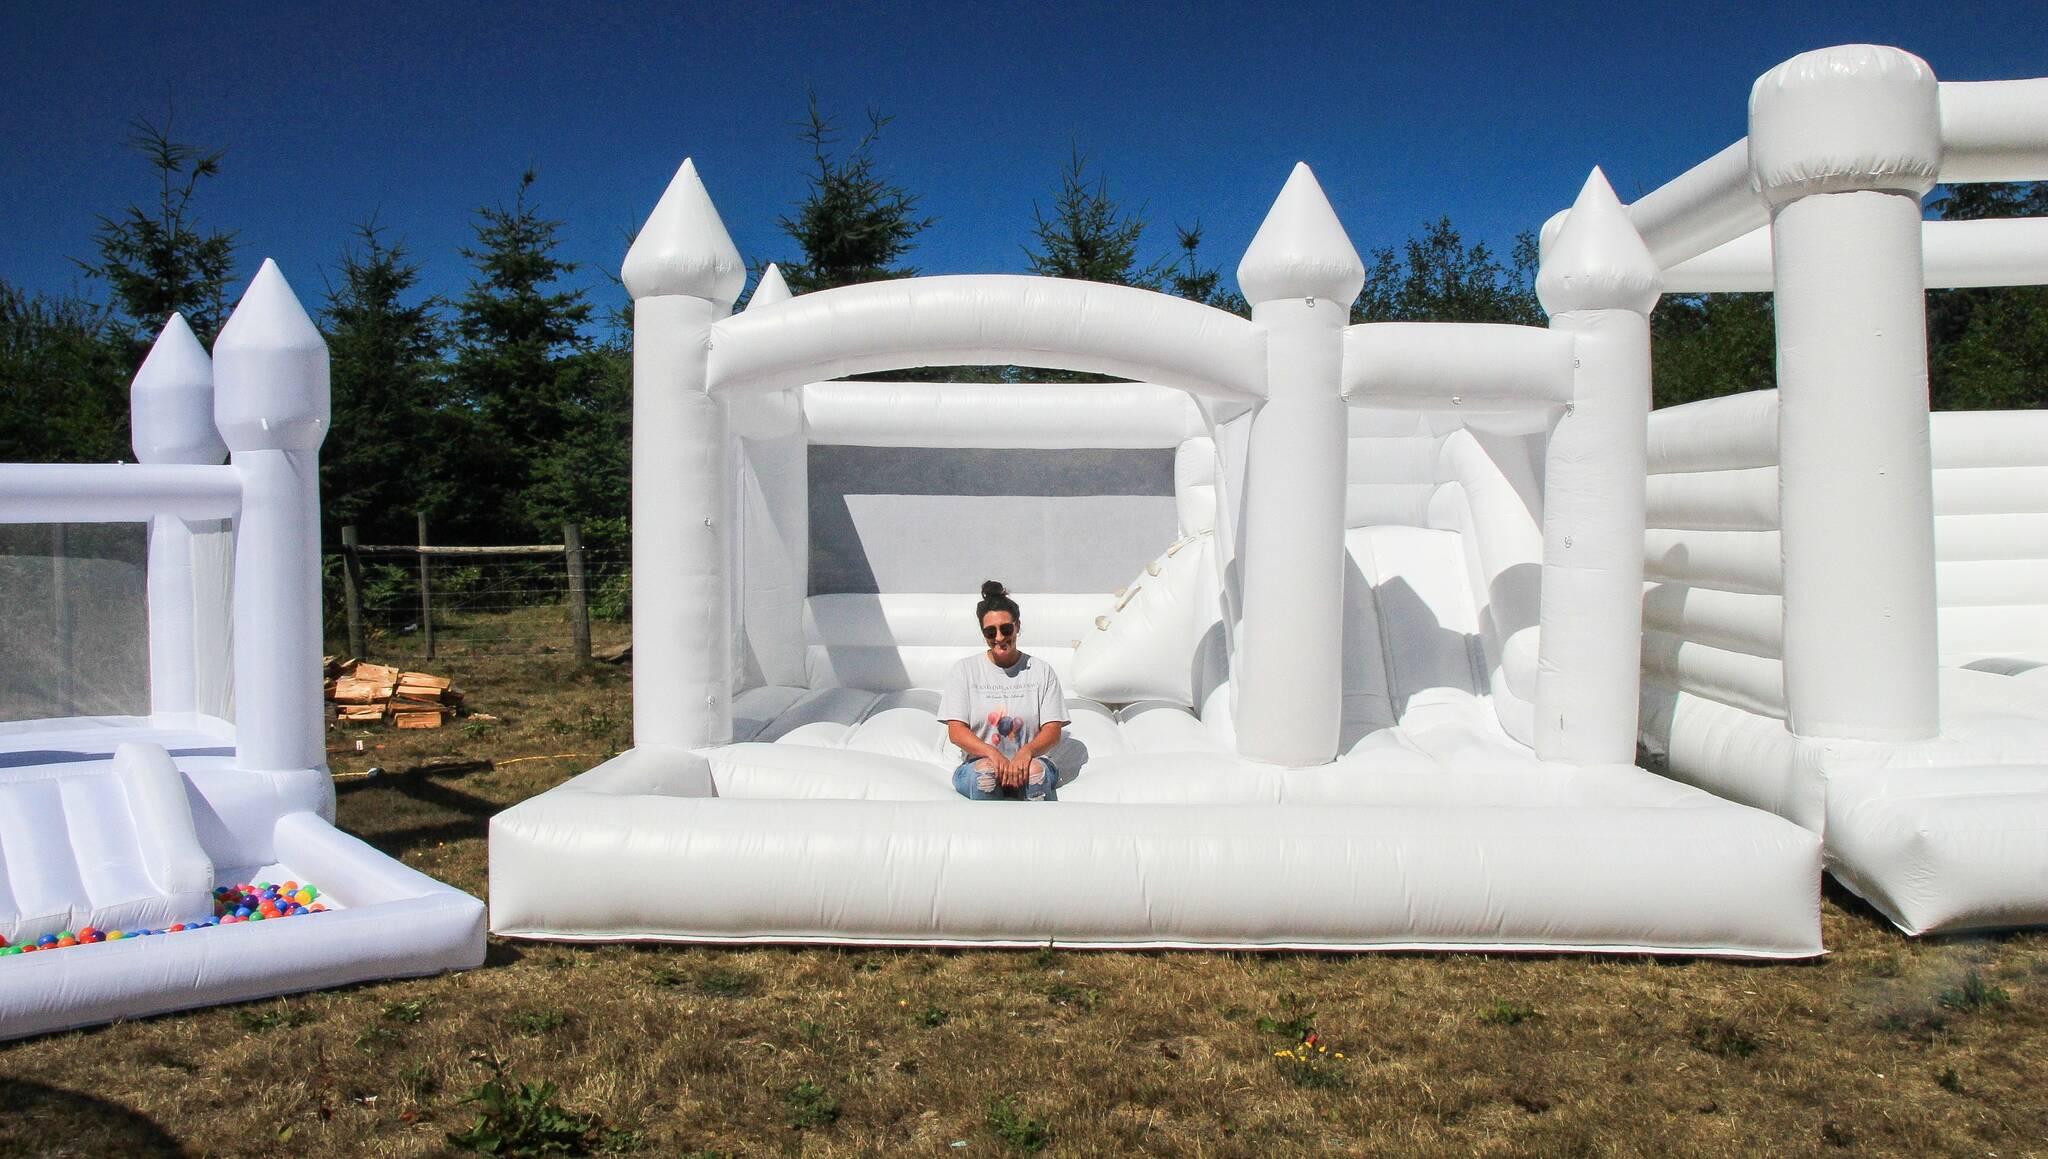 Photo by Luisa Loi/Whidbey News-Times
Marri Metz sits on the Great White, surrounded by her collection of inflatables.